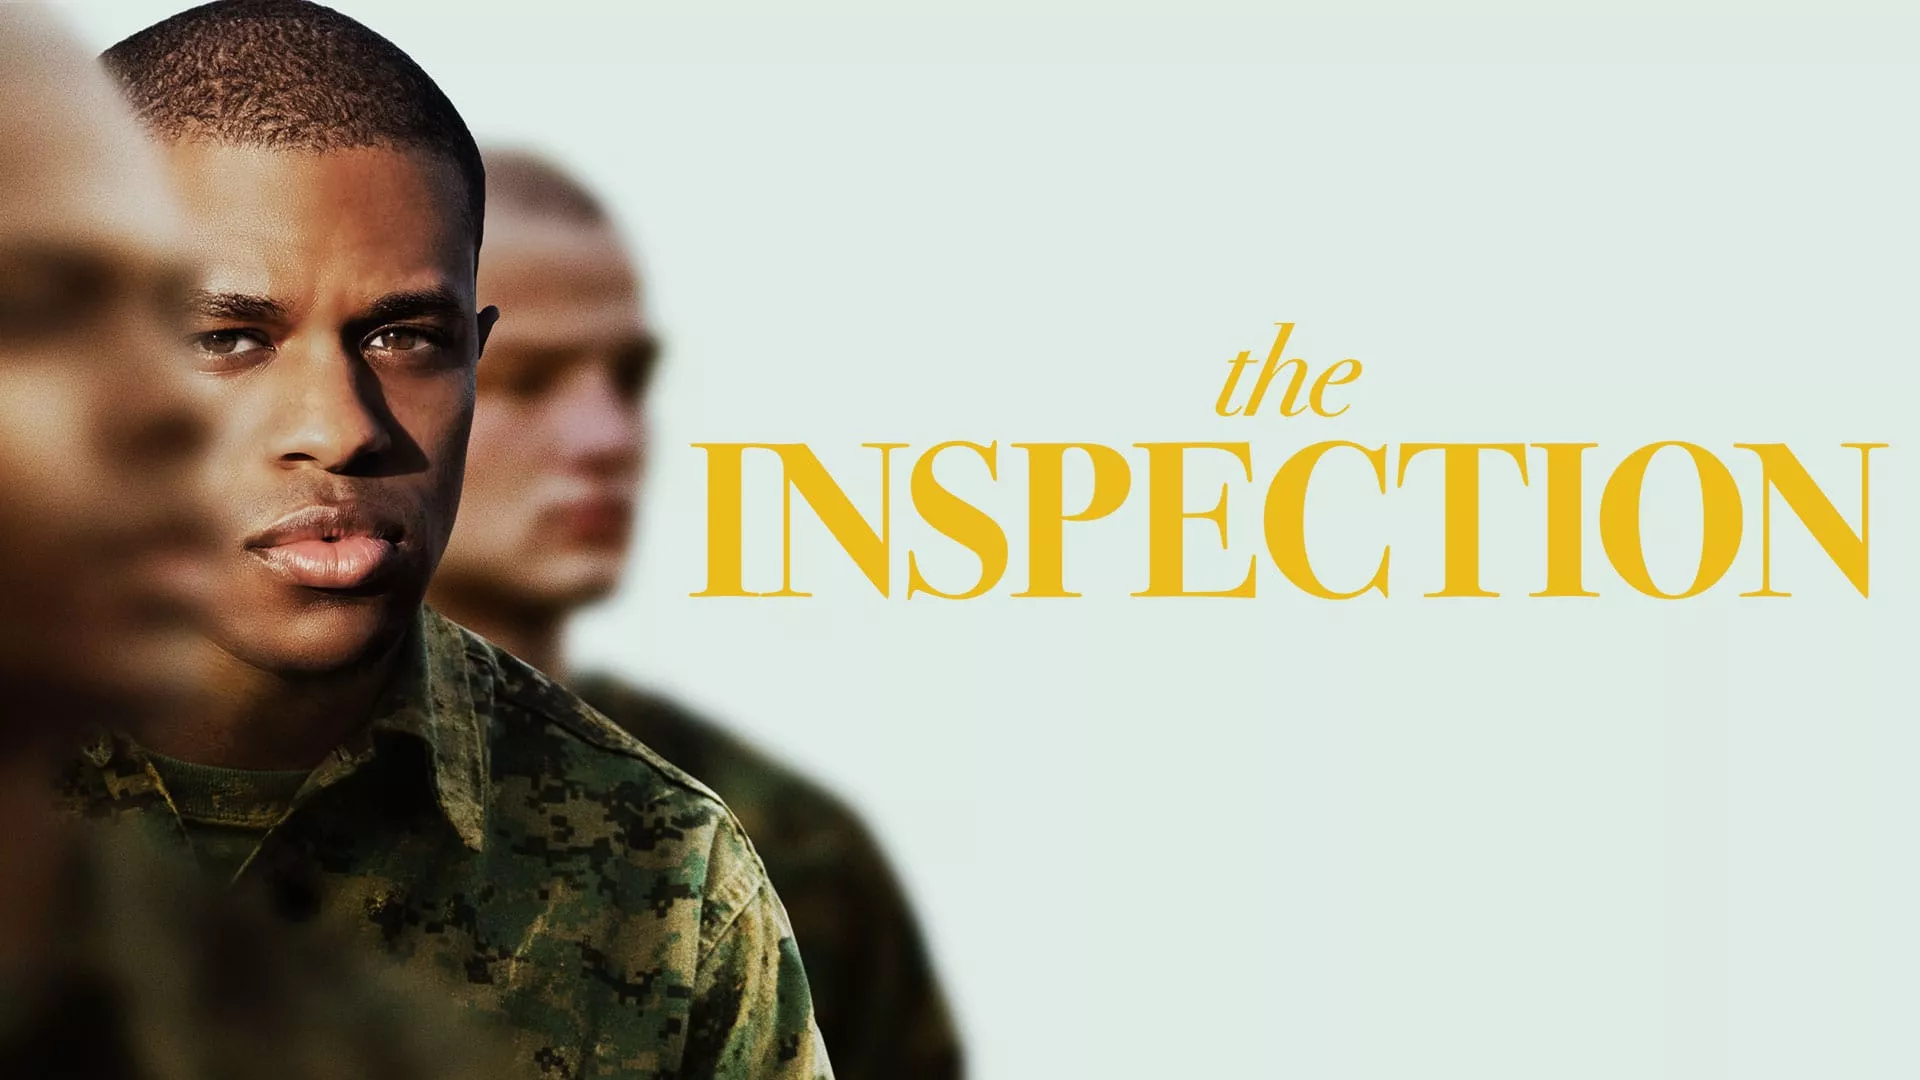 The Inspection Viaplay